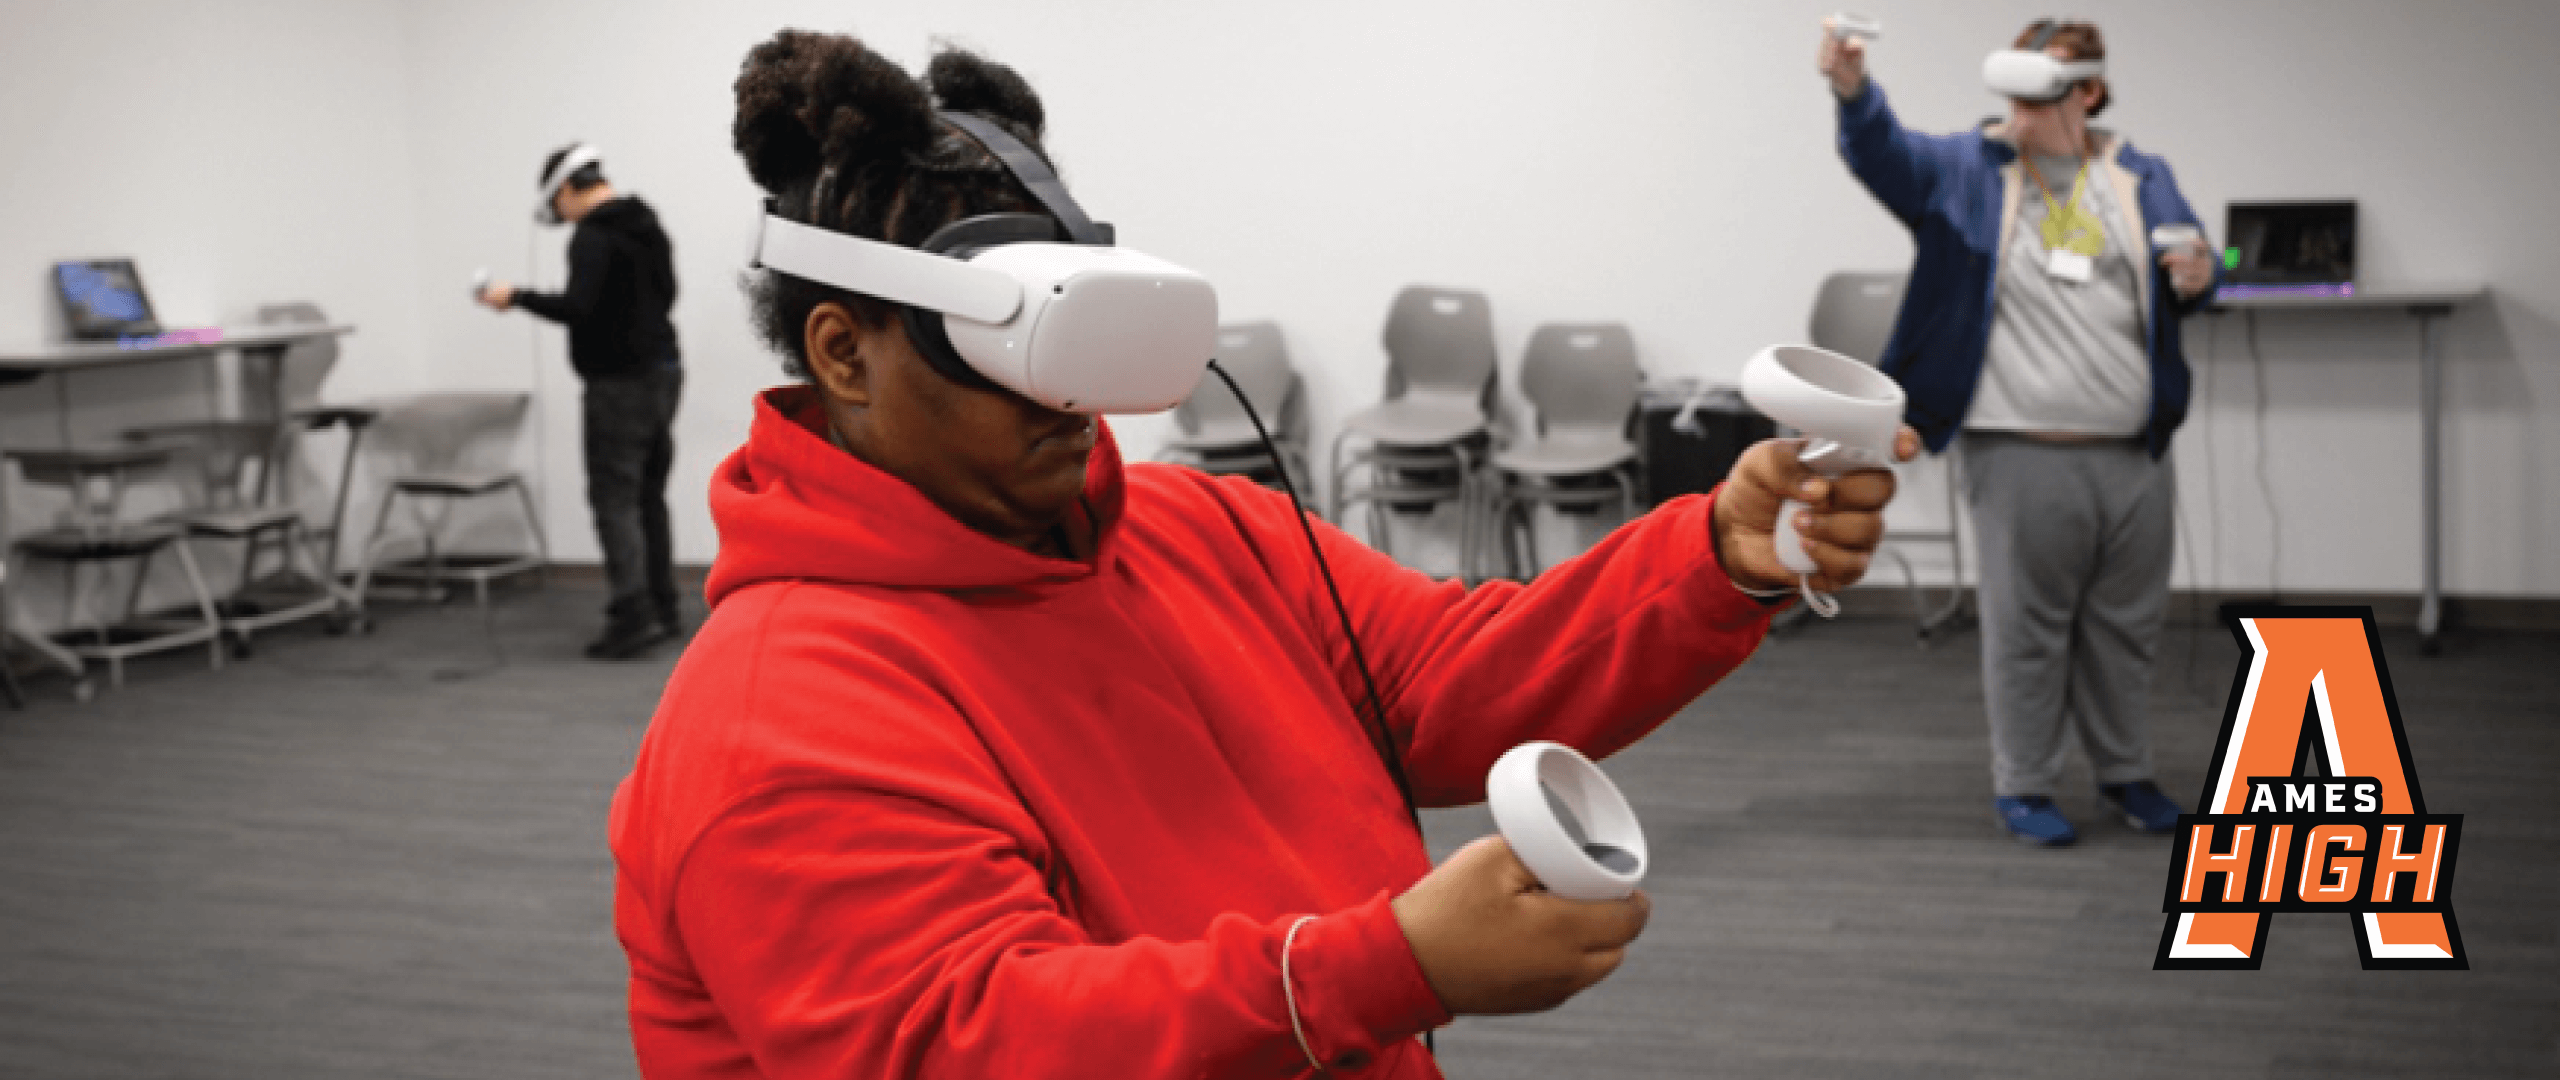 Students Learn About Careers Through Virtual Reality